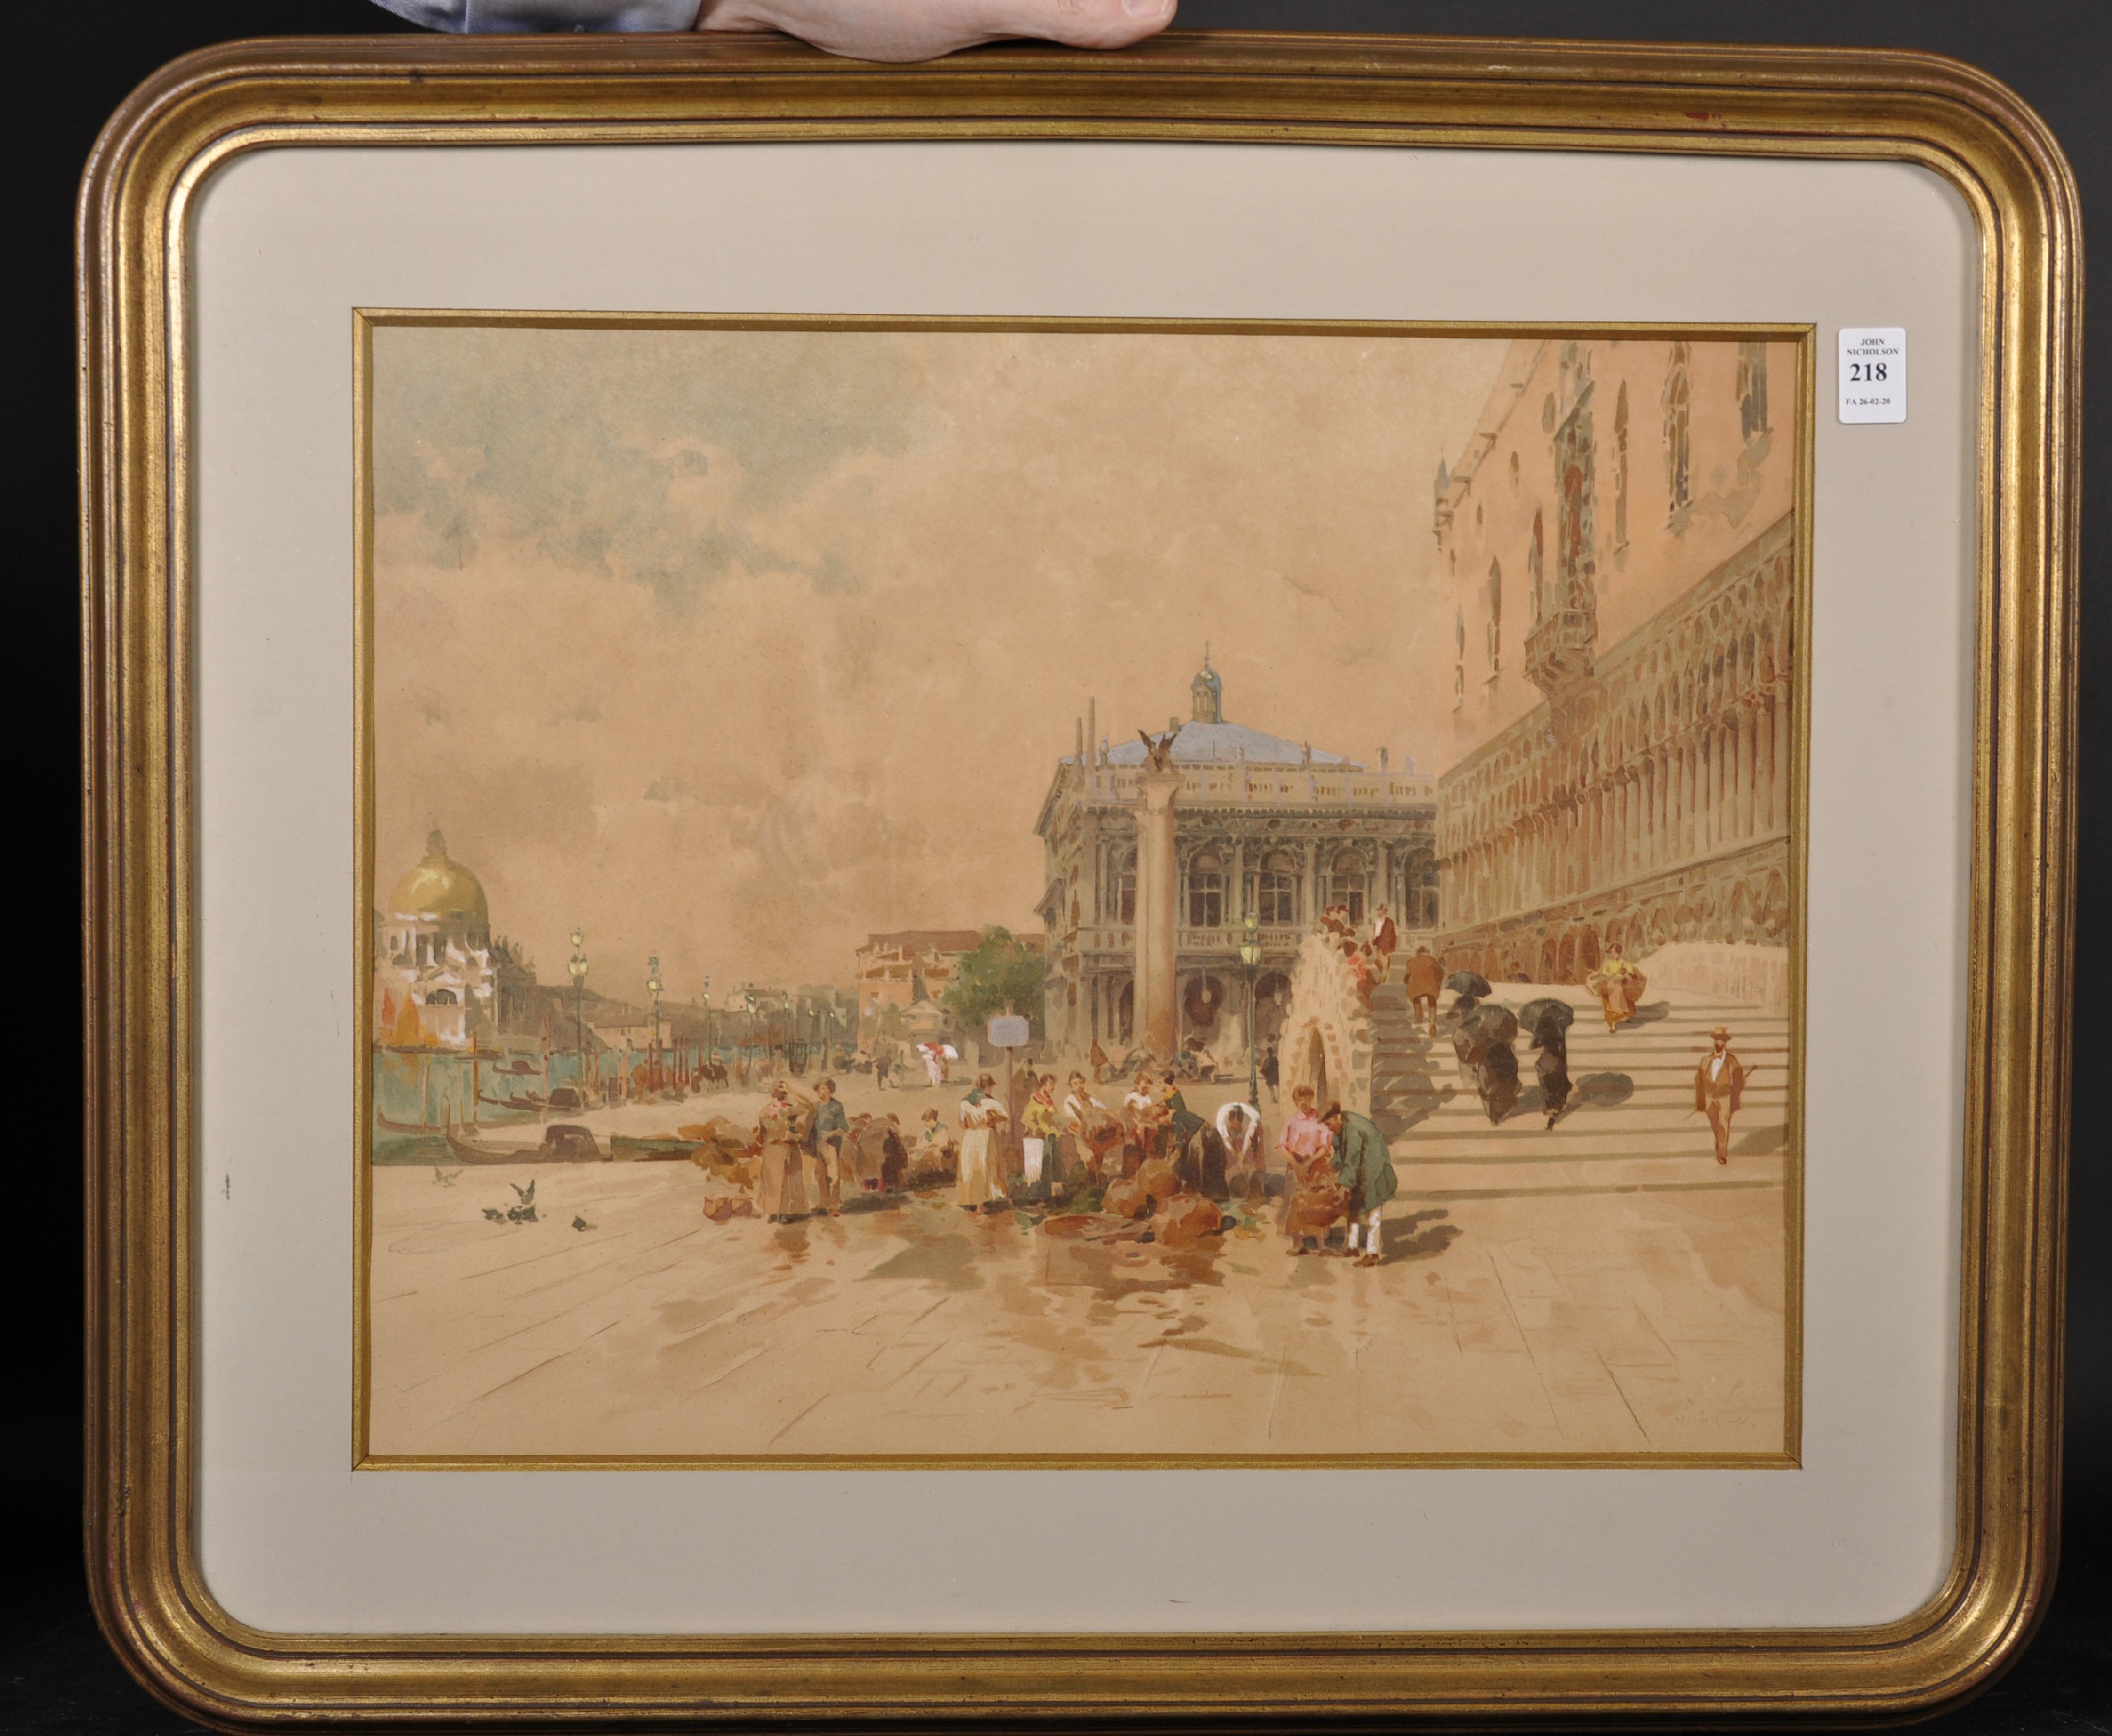 Early 20th Century Italian School. A Venetian Street Scene with Figures, CHROMOLITHOGRAPH, - Image 2 of 4